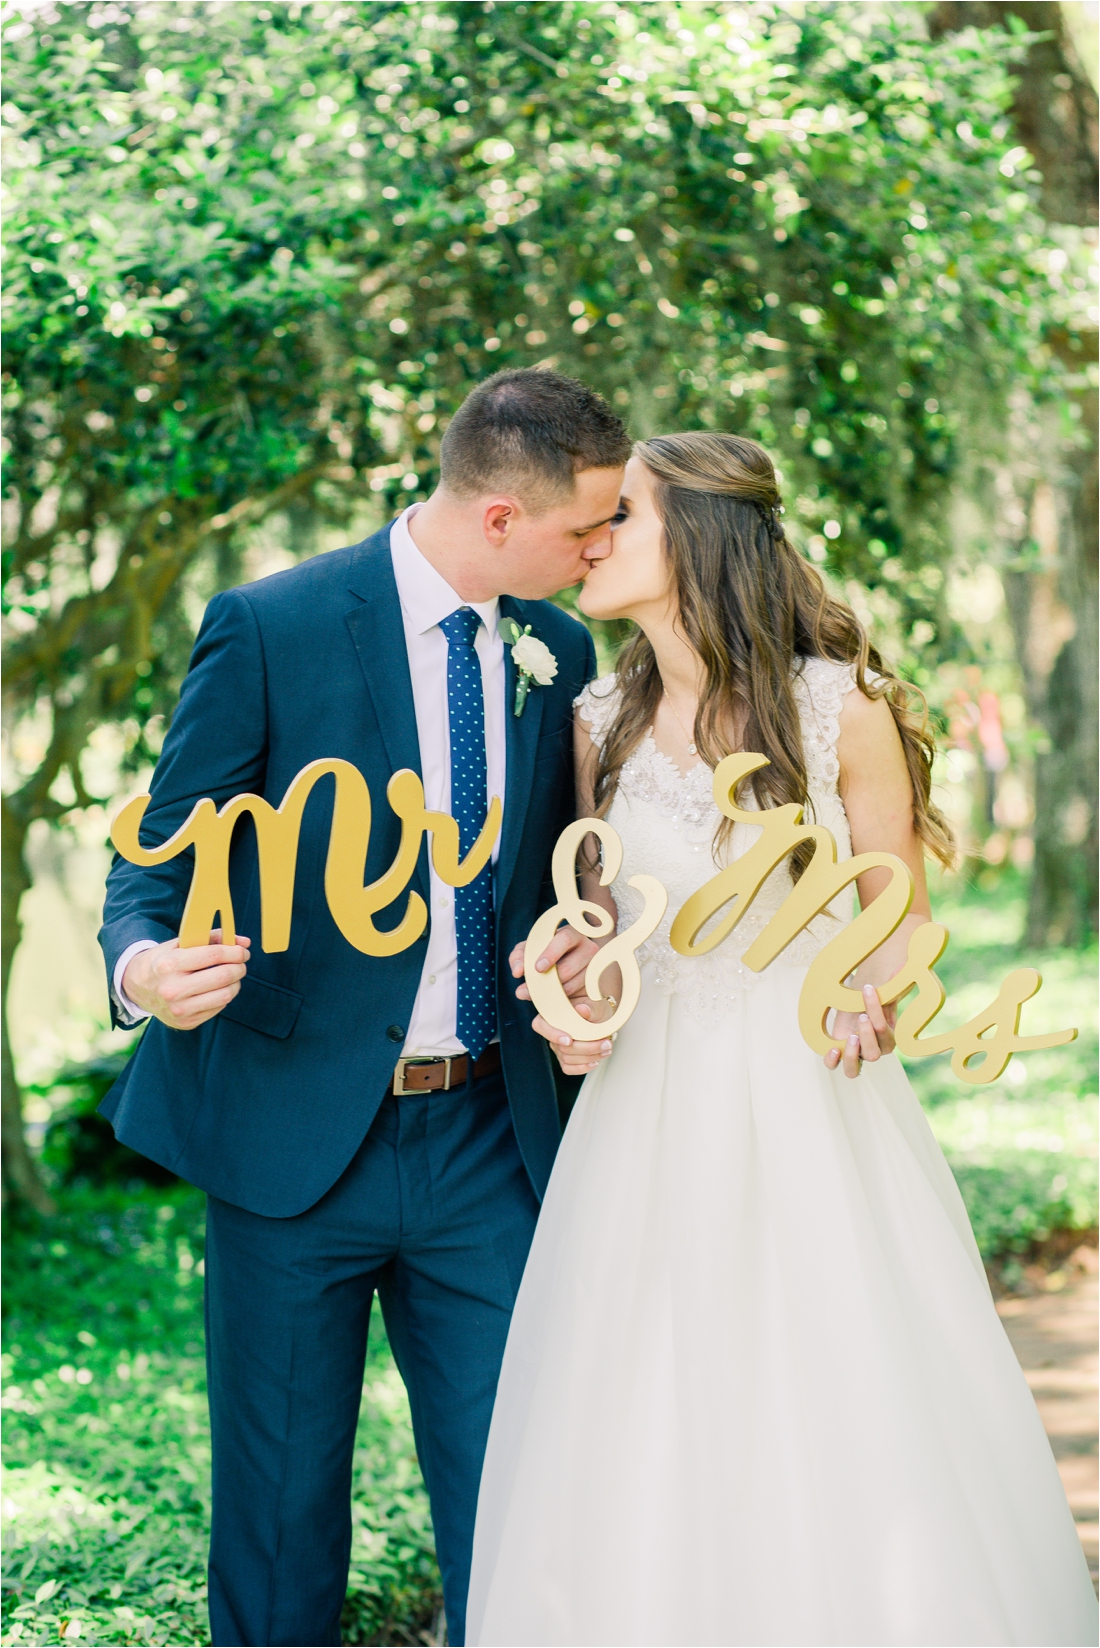 Grand Mariott Wedding Point Clear Mobile Alabama Photographer Jennie Tewell Photography 0021